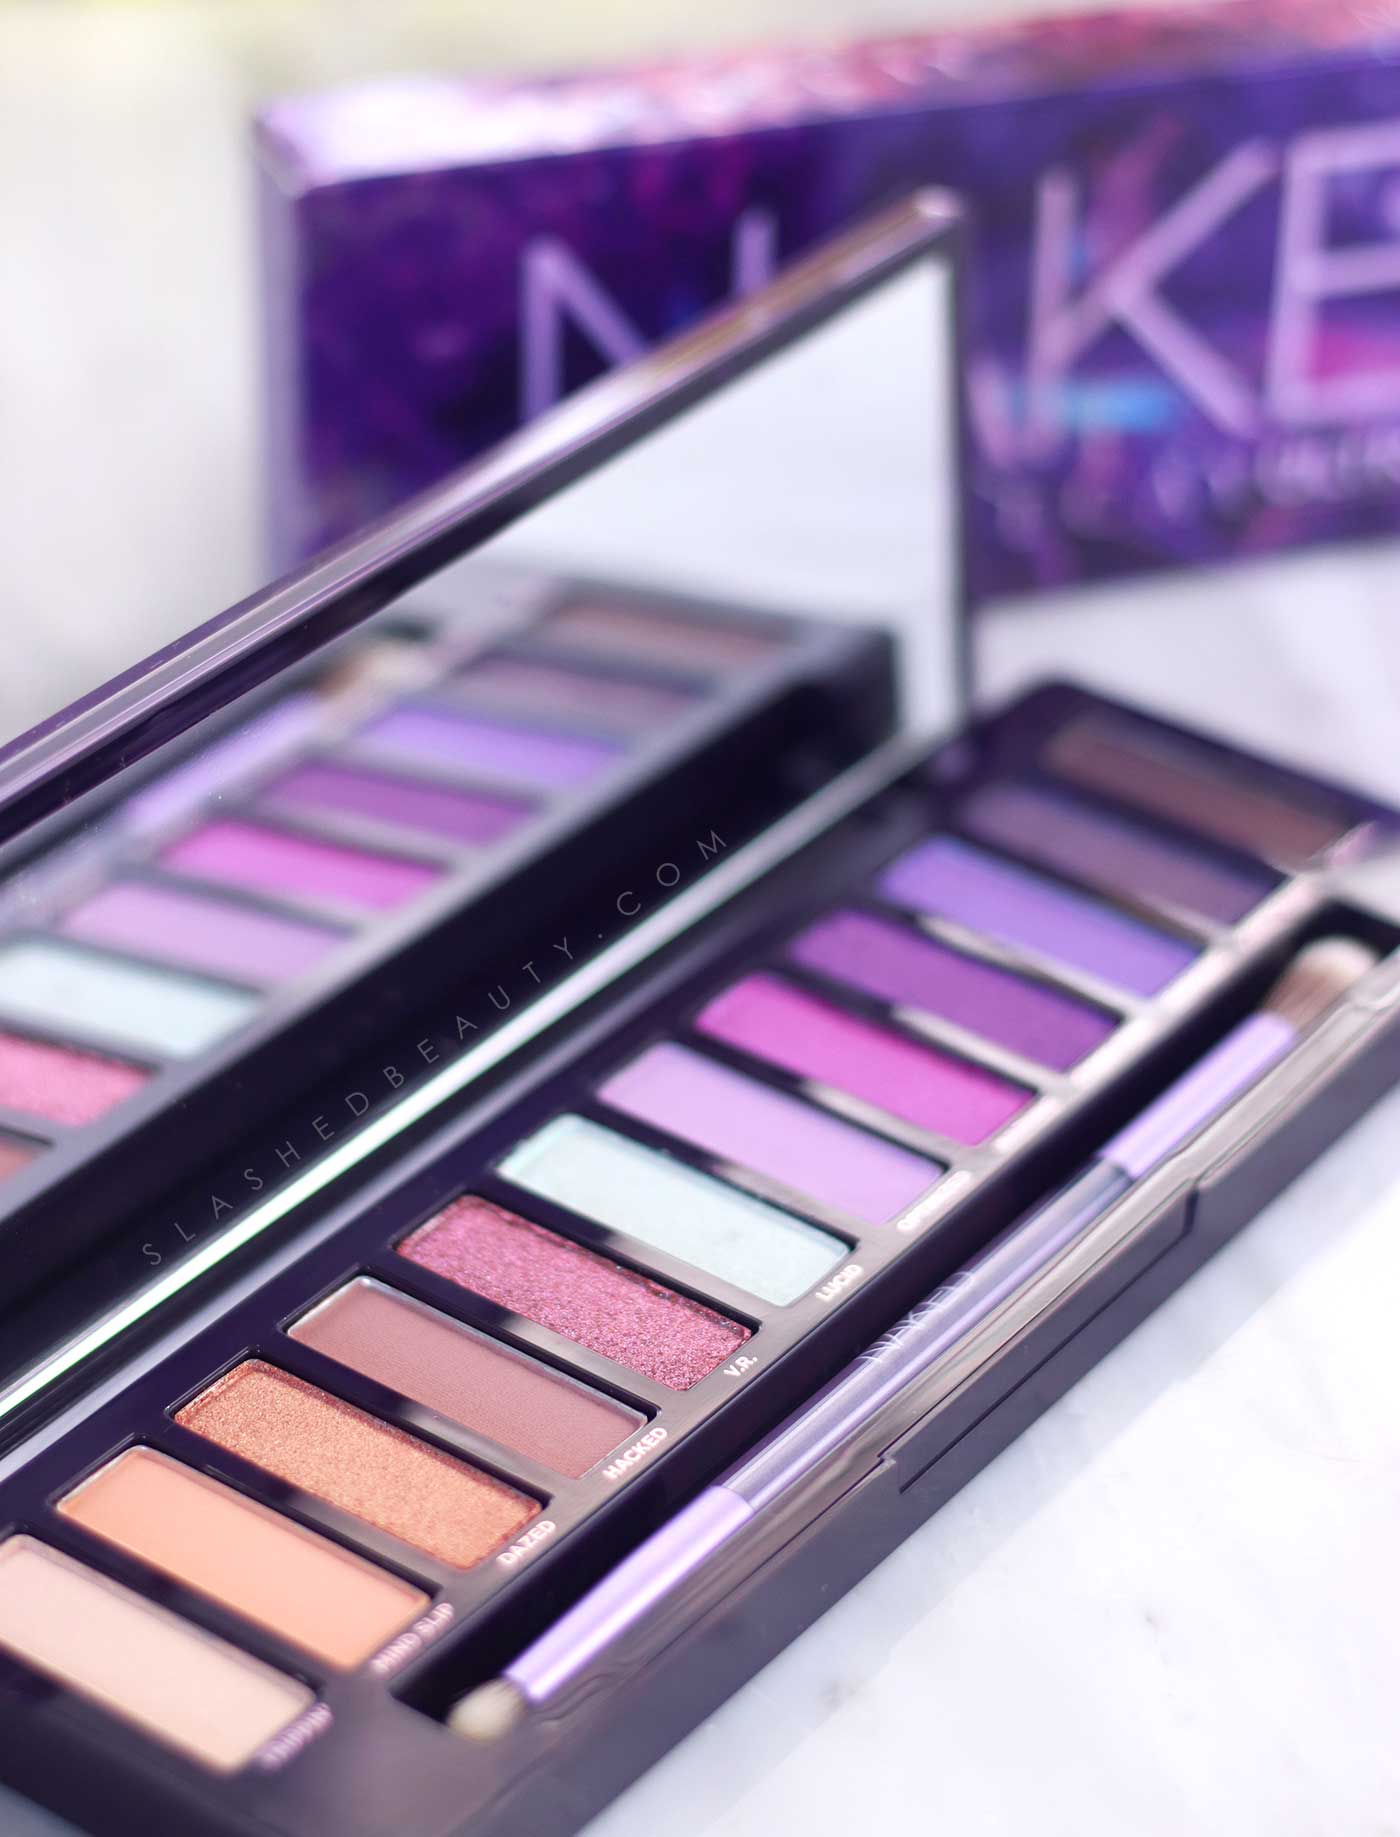 NEW Urban Decay Naked Ultraviolet Palette Review & Swatches | Slashed Beauty